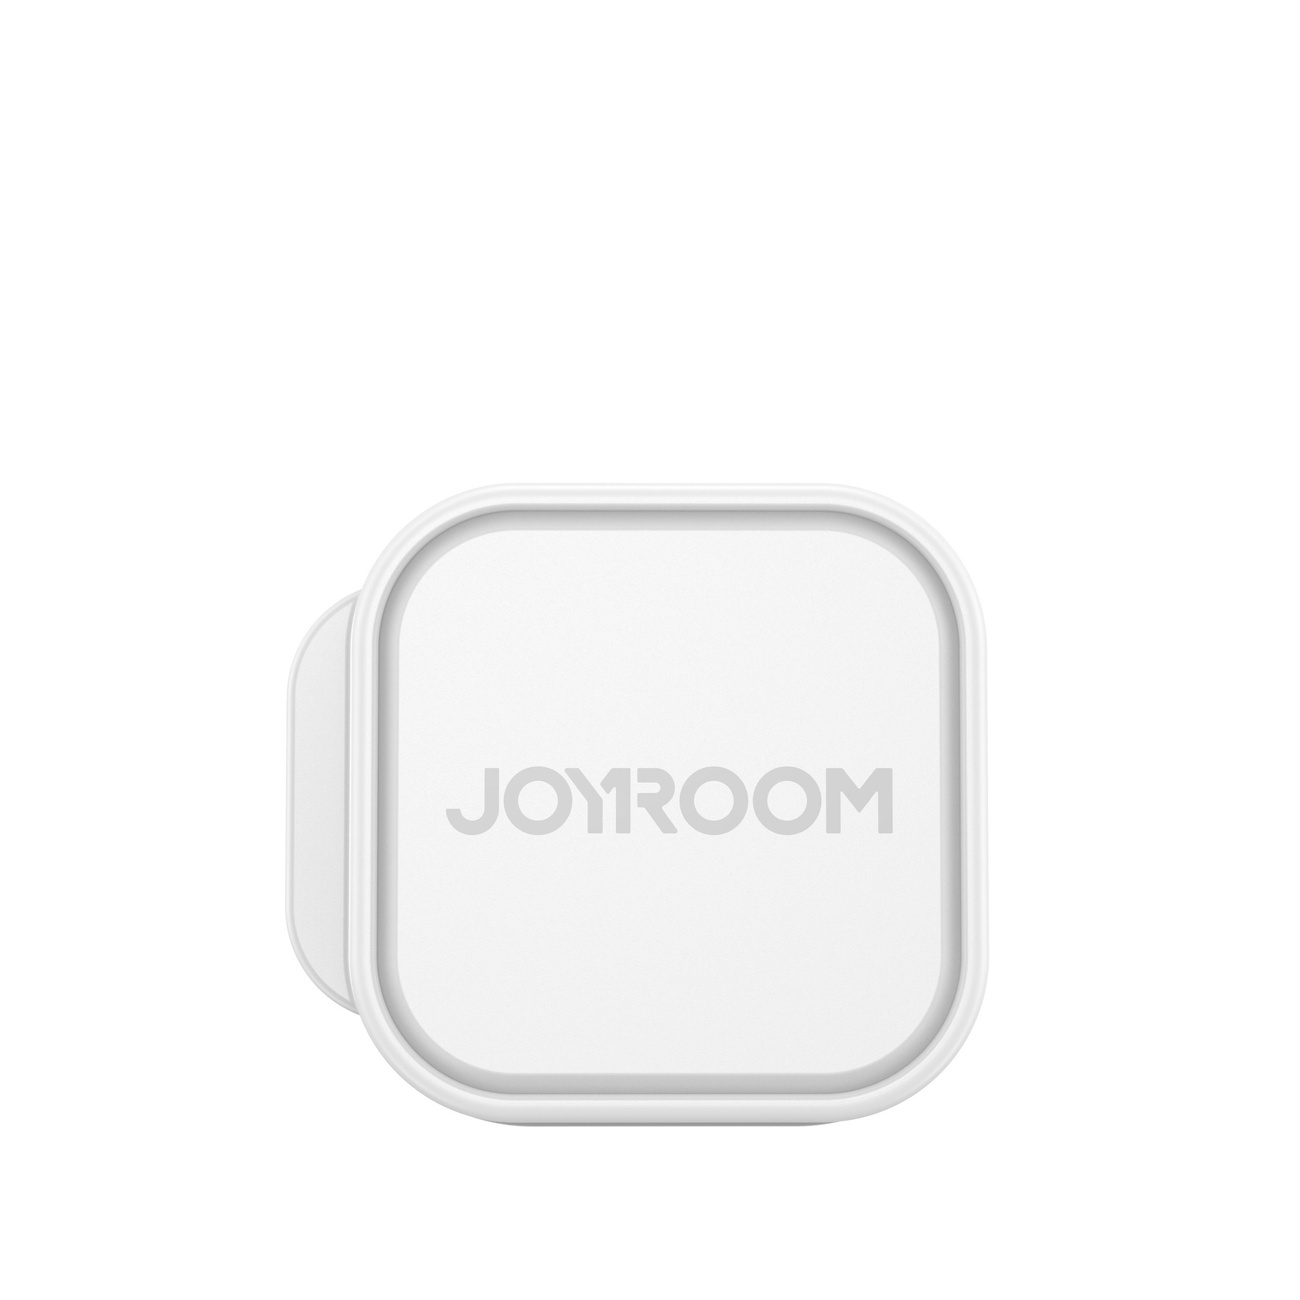 Joyroom JR-ZS368 cable organizer magnetic white [3 PACK]